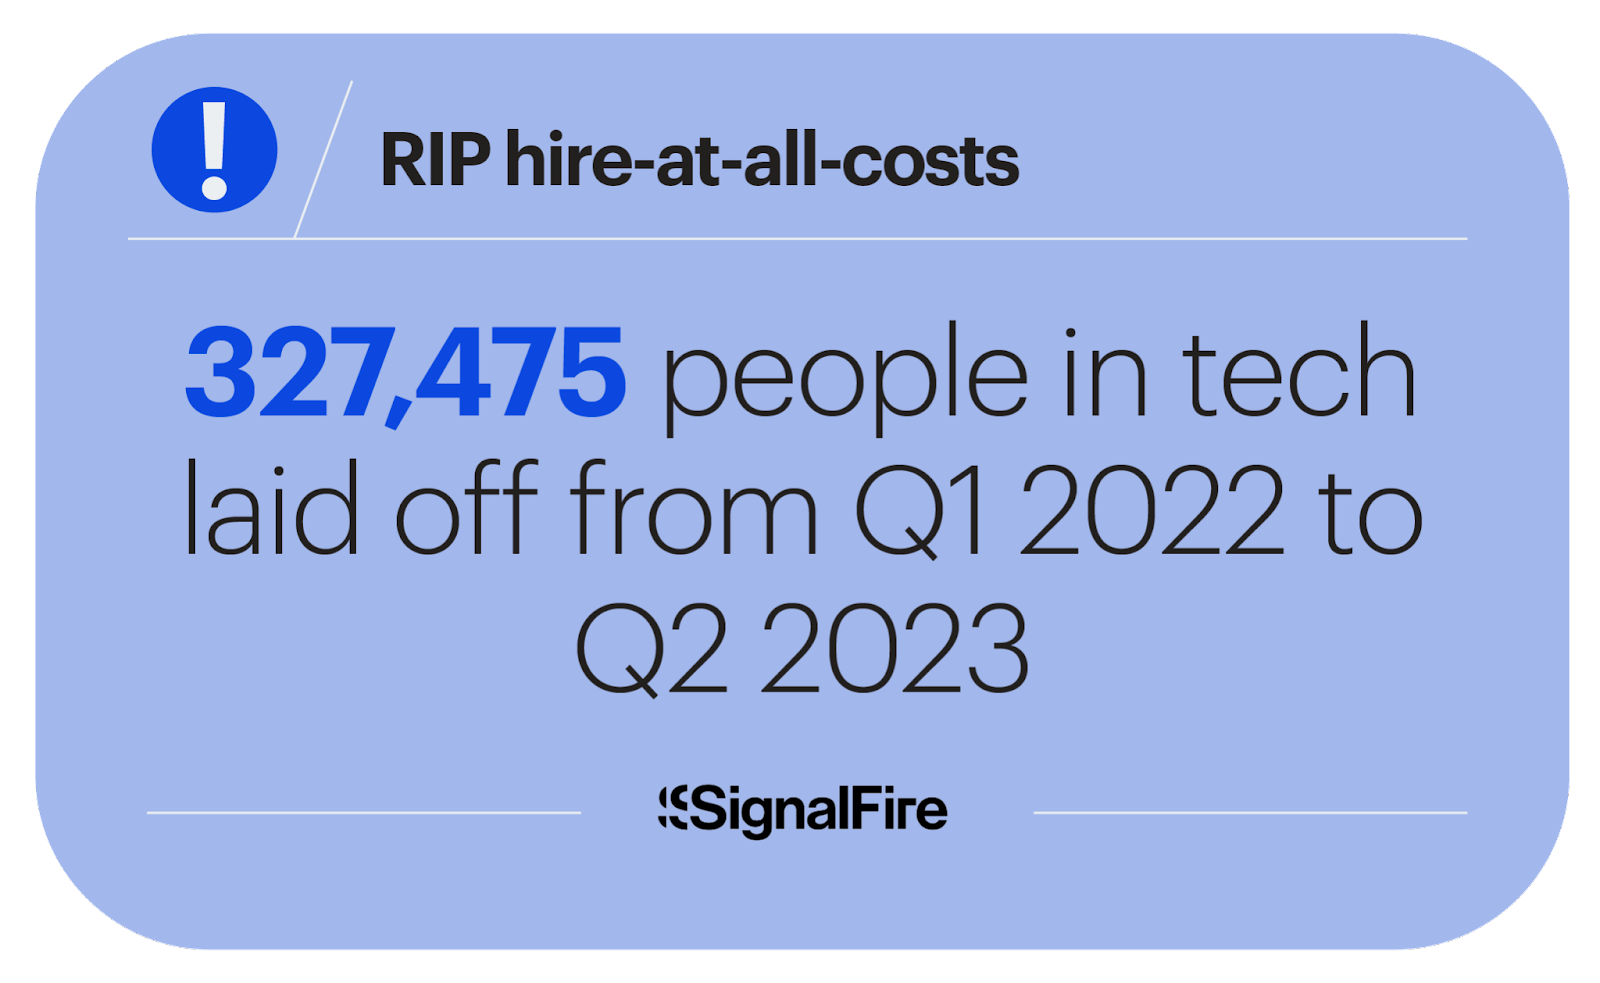 327,475 people in tech laid off from Q1 2022 to Q2 2023